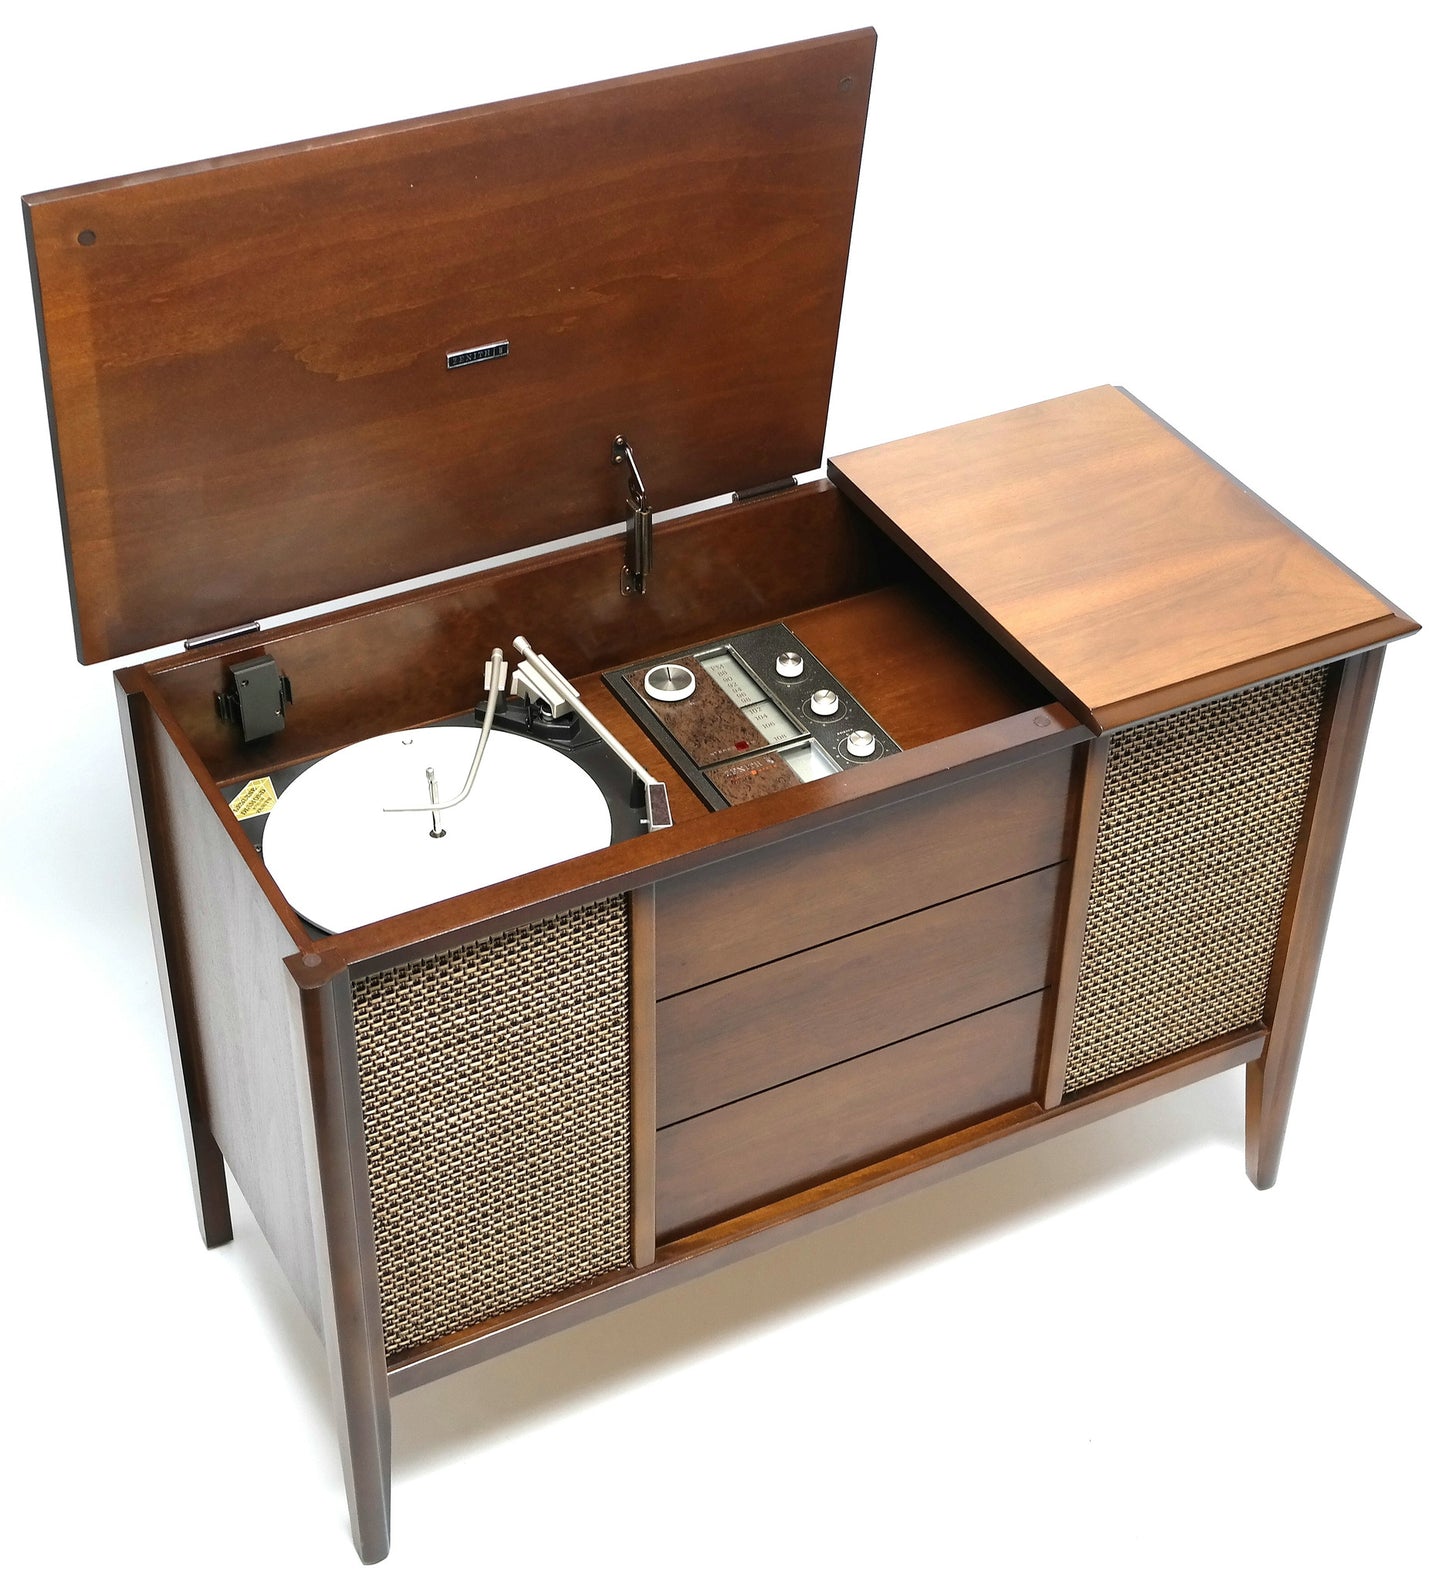 VINTAGE Mid Century Zenith Mini Stereo Console Bluetooth iPod iPhone Android Input MINI Record Player The Vintedge Co.